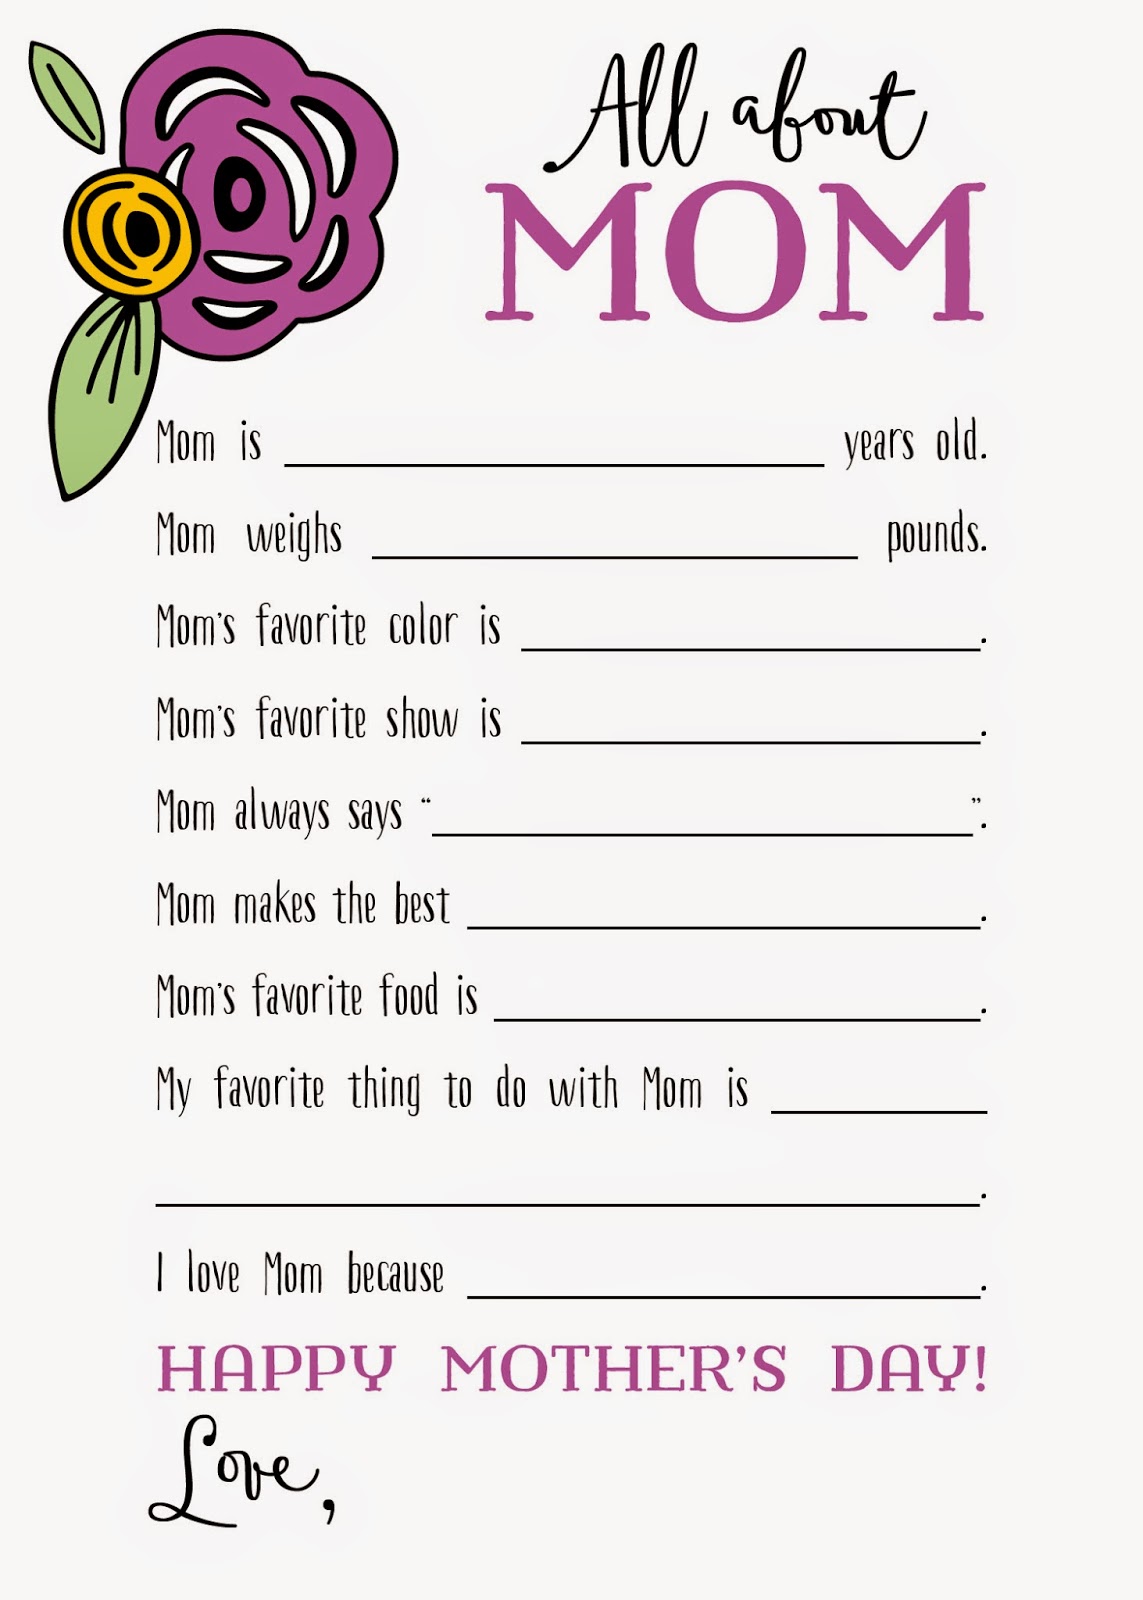 free-printable-all-about-my-mom-printable-get-your-hands-on-amazing-free-printables